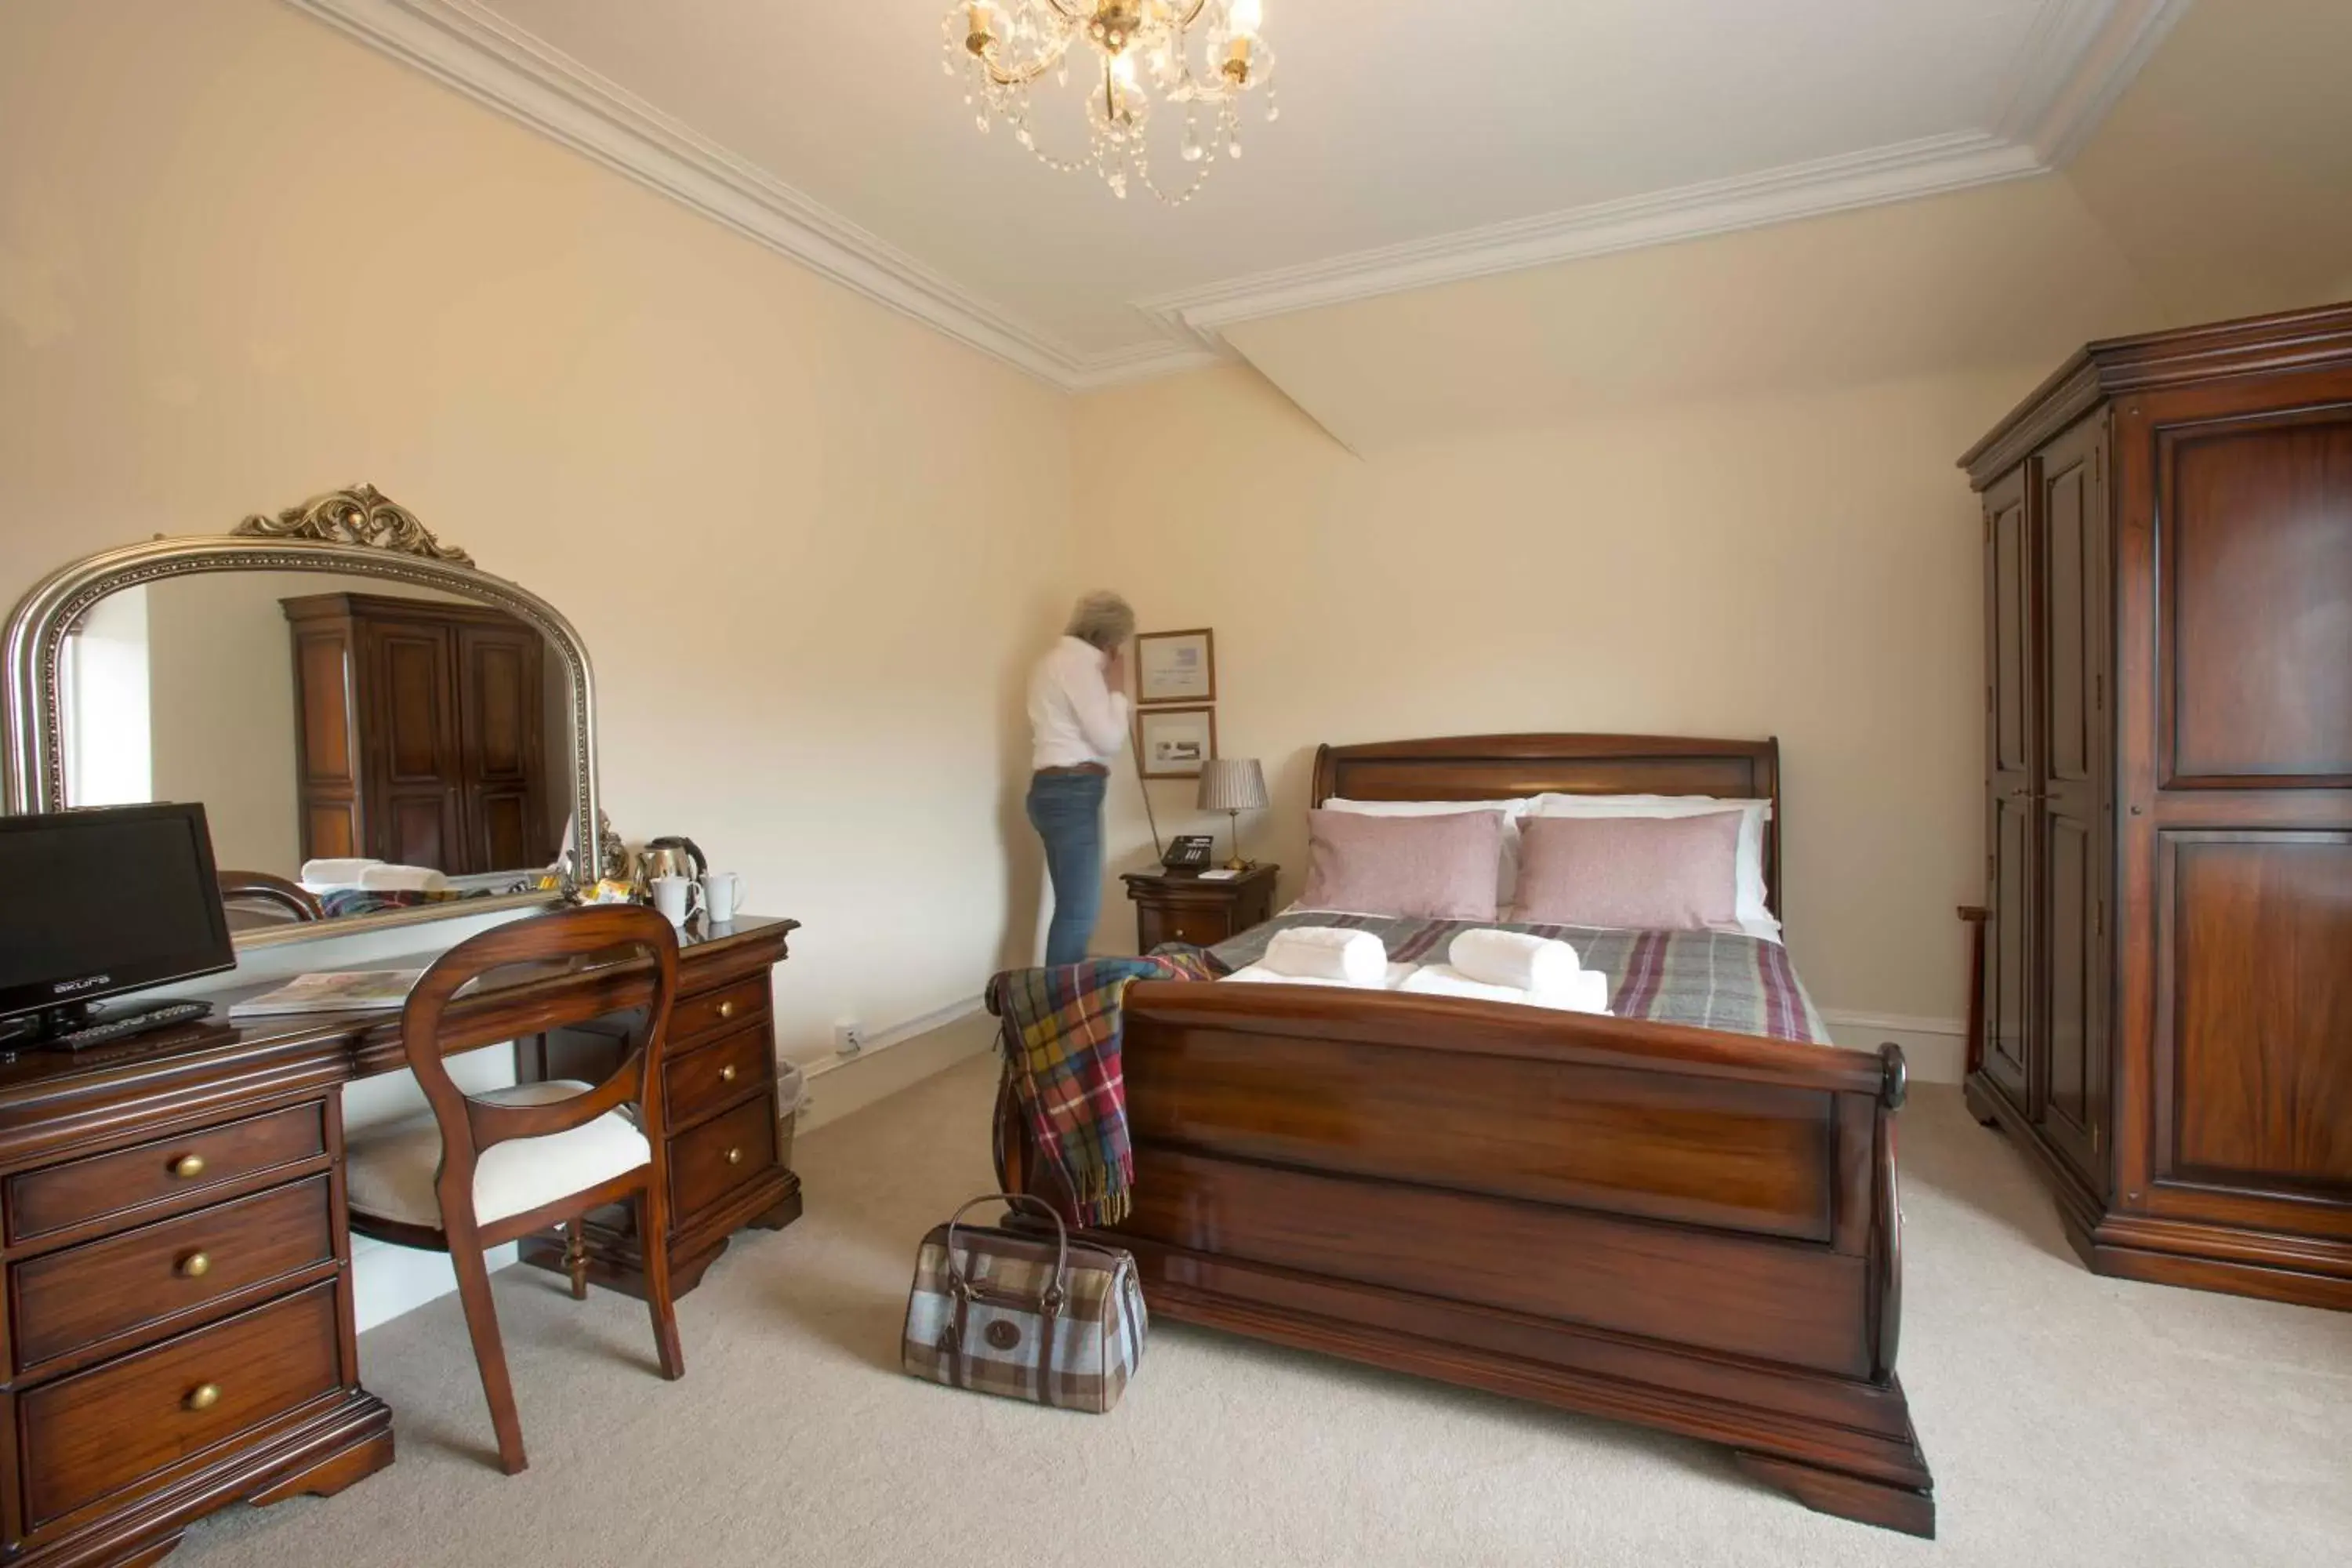 Room Photo in Saplinbrae Hotel and Lodges